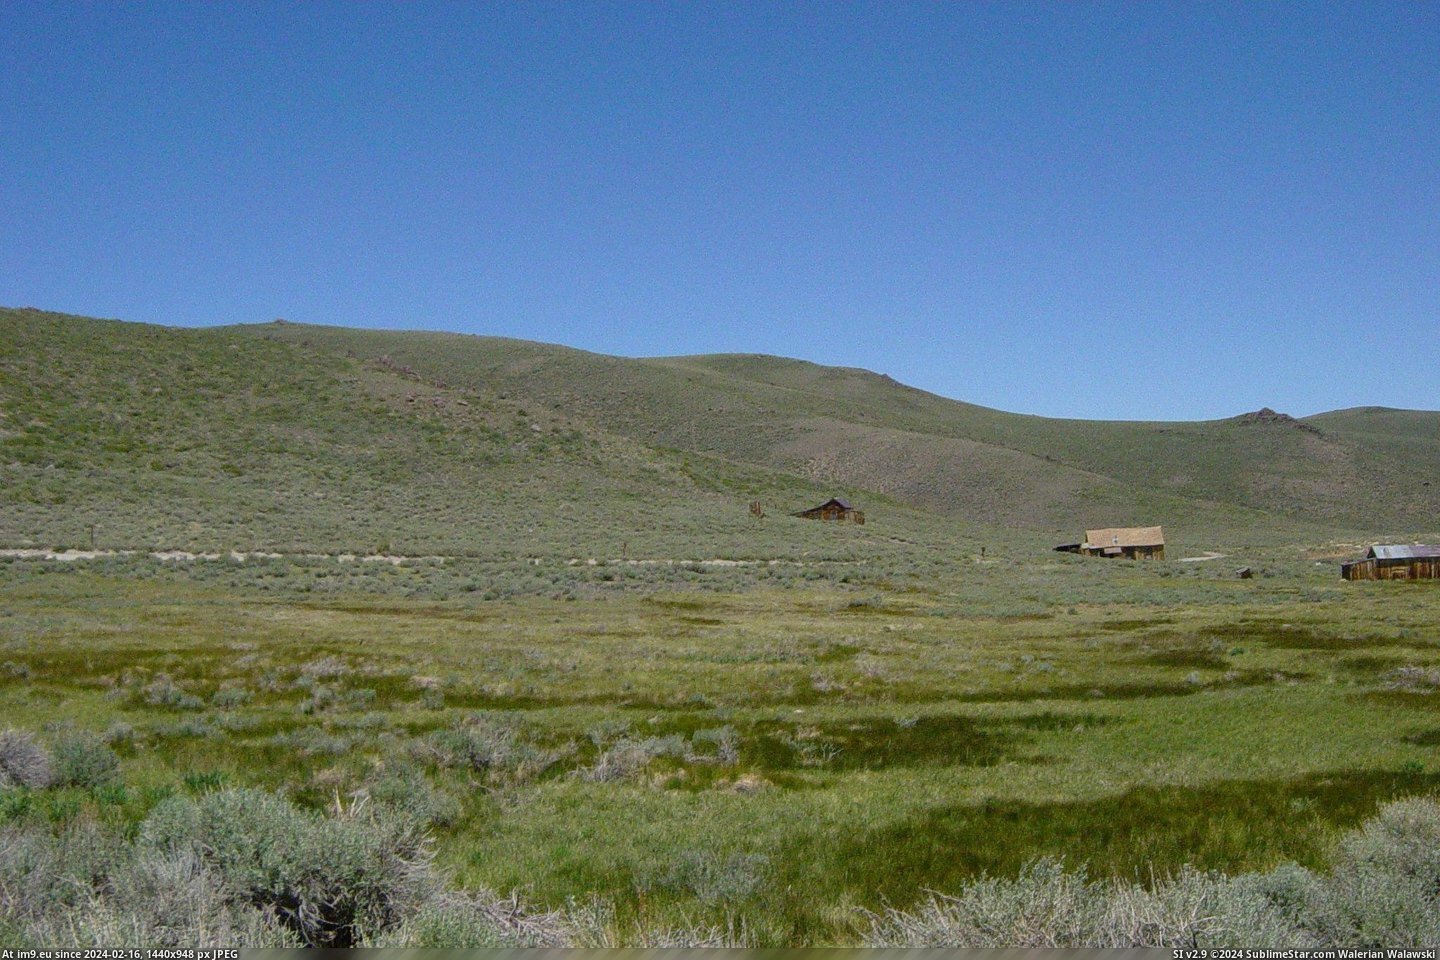 #California #Bodie #Chinatown #Site Site Of Chinatown In Bodie, California Pic. (Bild von album Bodie - a ghost town in Eastern California))